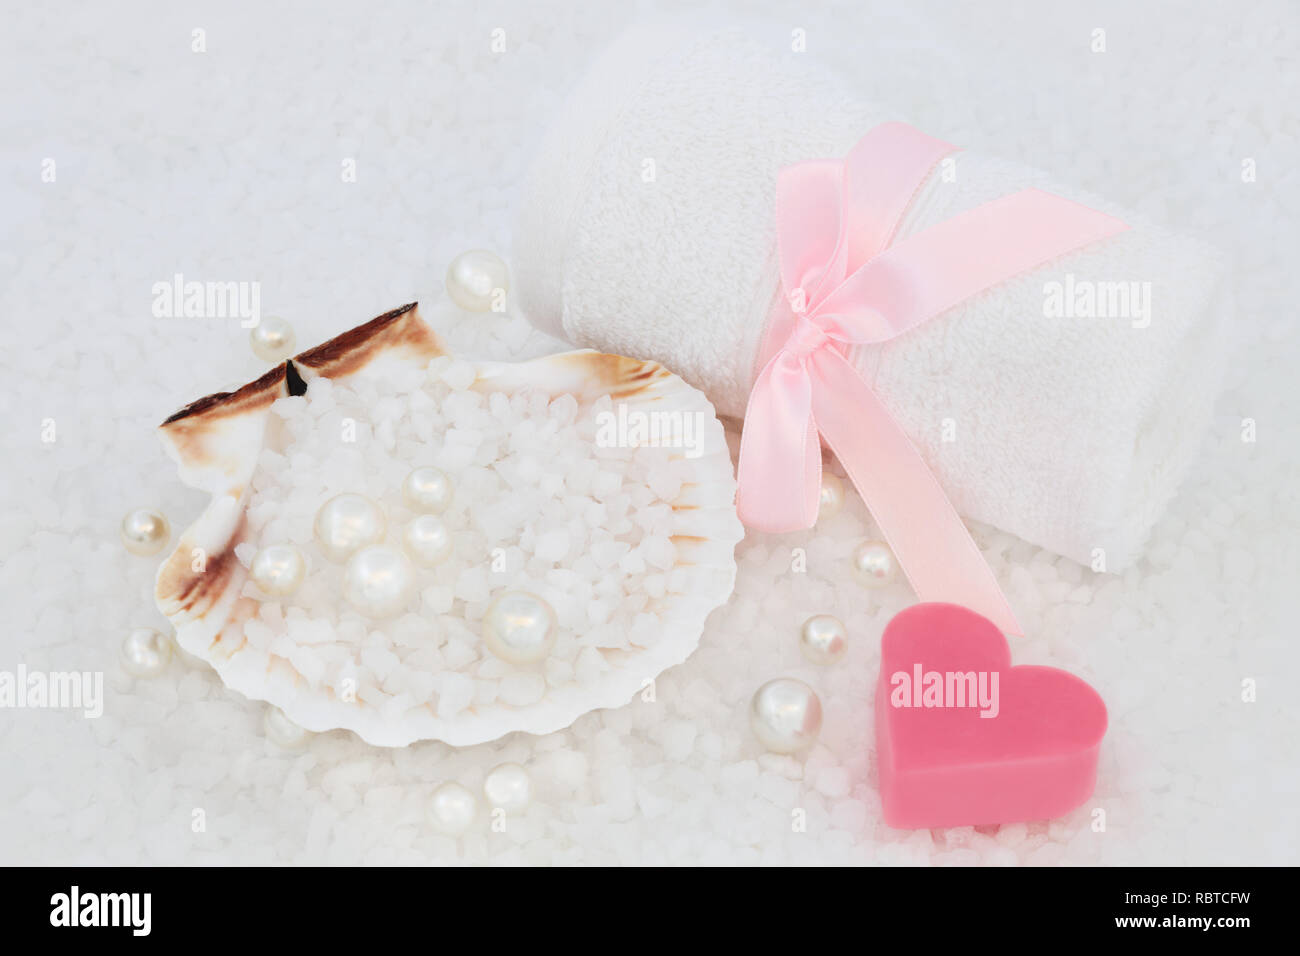 Sea salt for skincare exfoliation beauty treatment in a scallop shell with white flannel, heart shaped soap and pearls. Health care concept, top view. Stock Photo